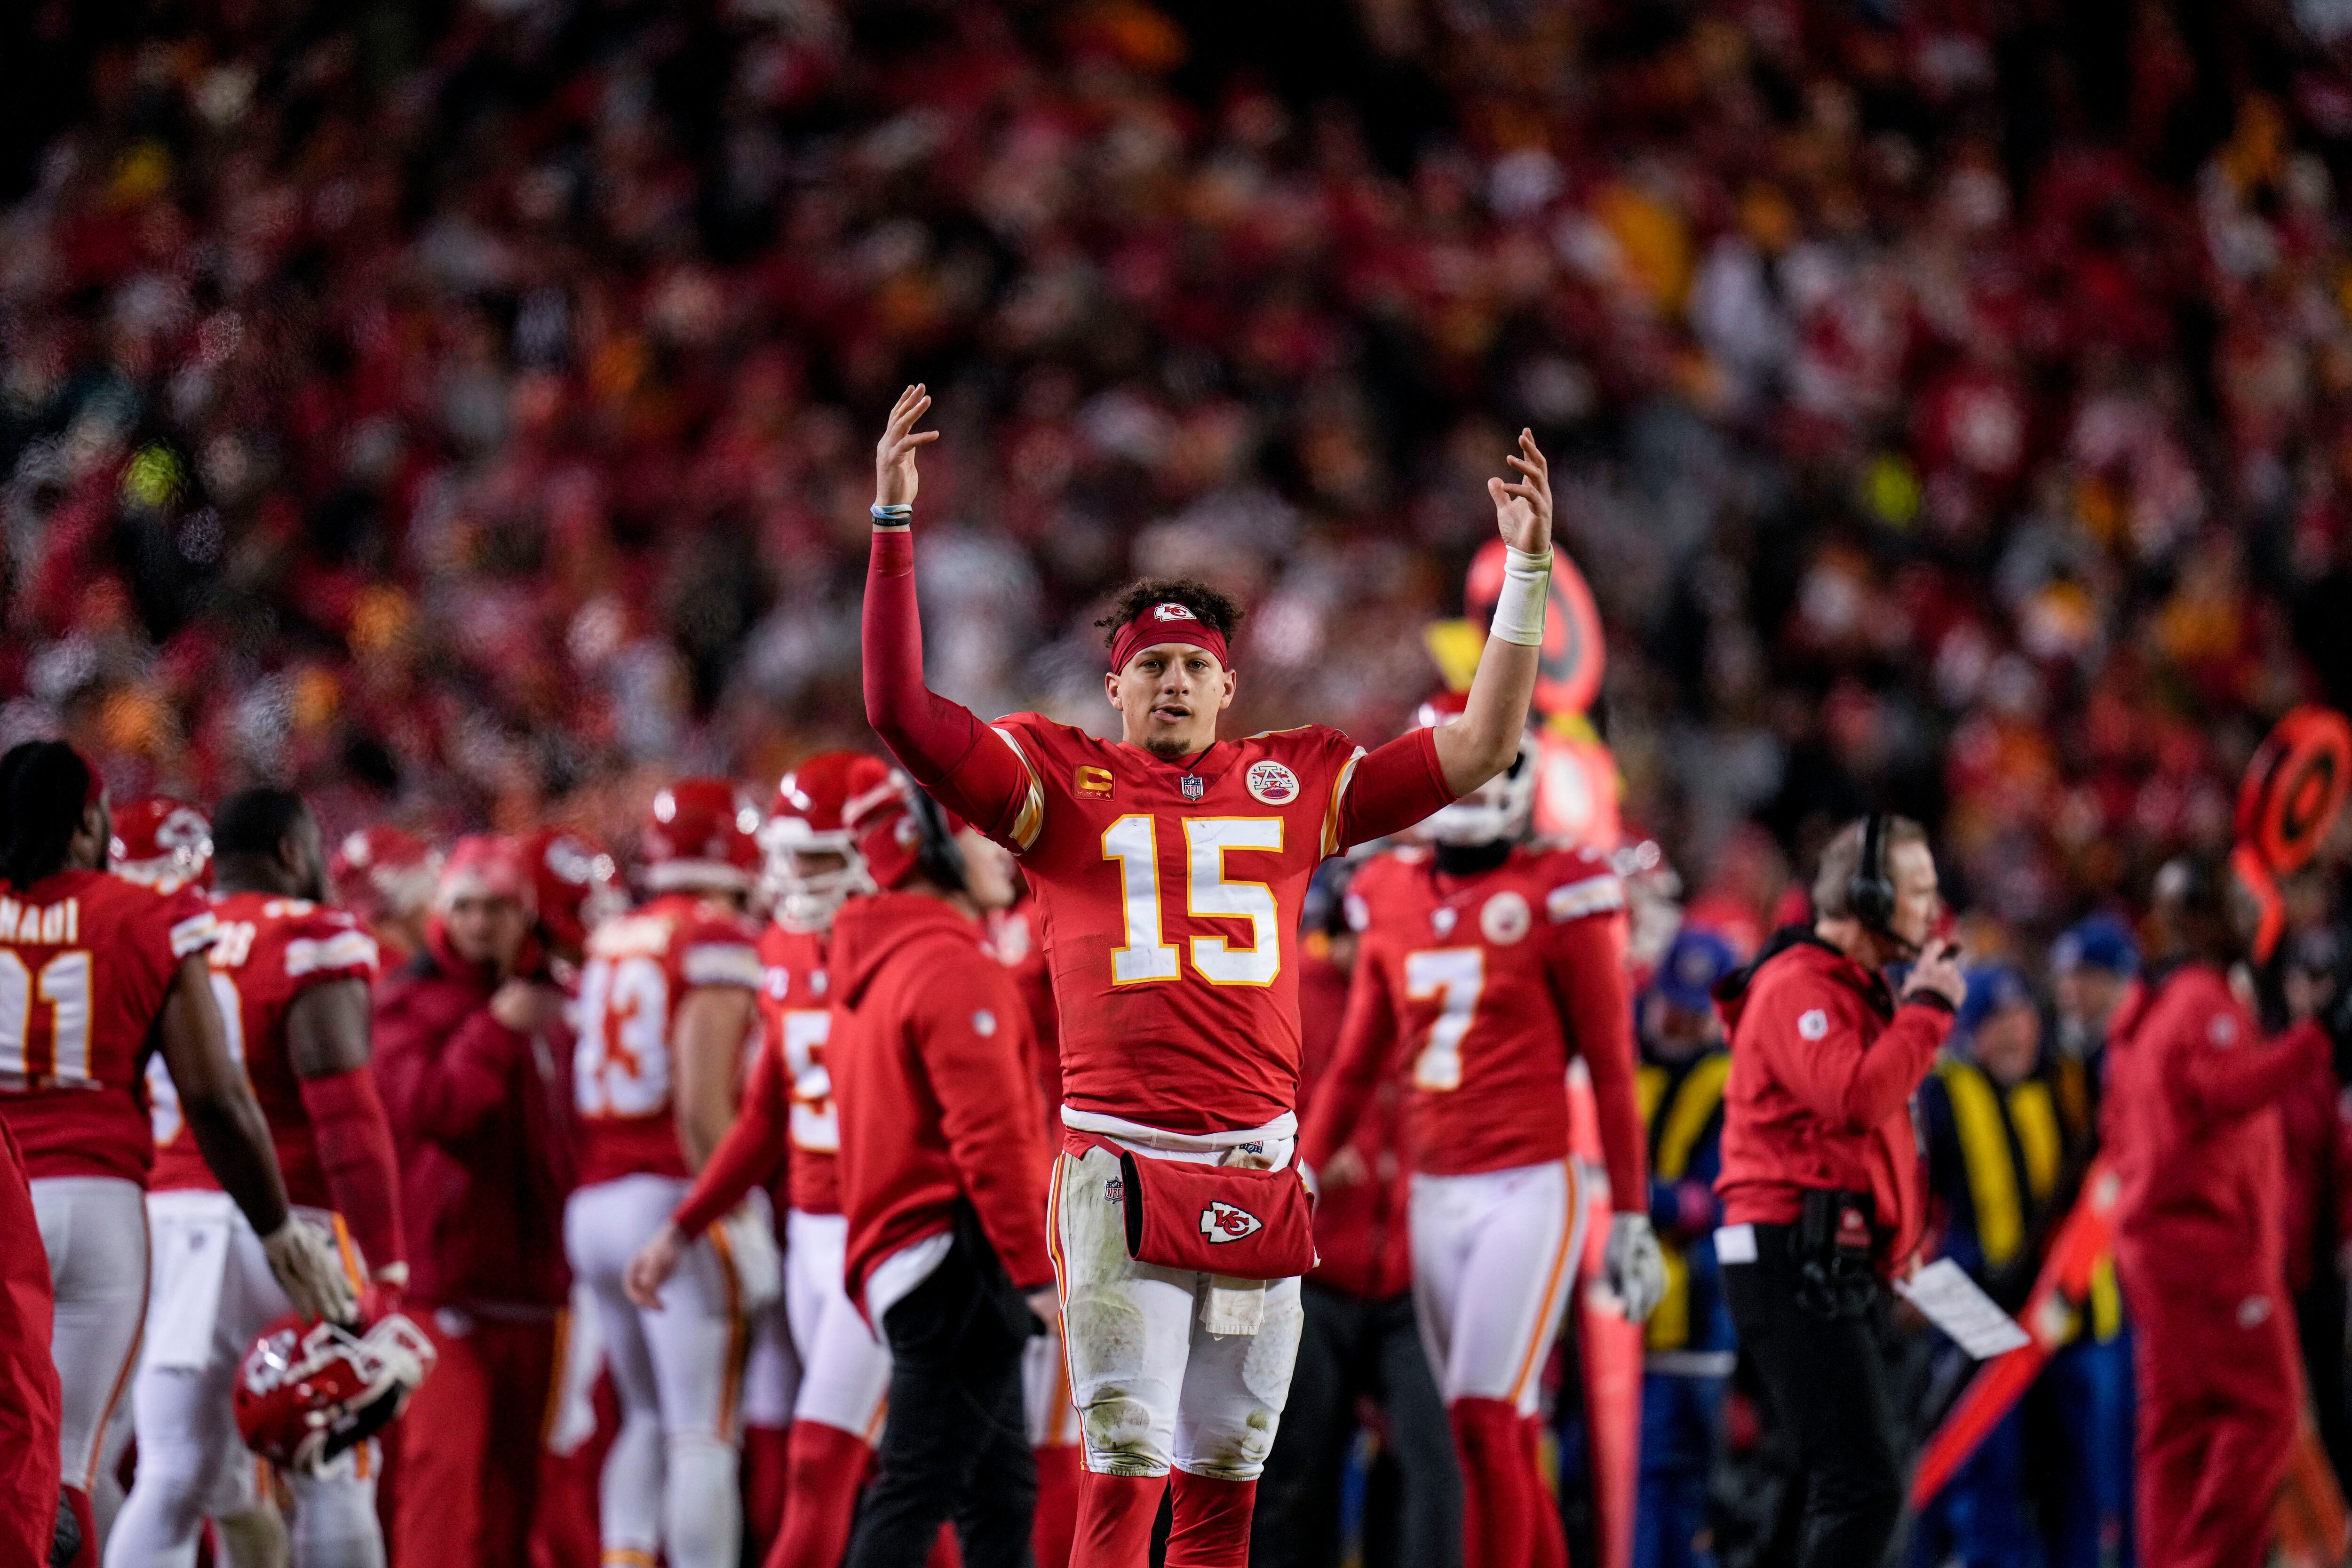 Chiefs Defeat 49ers to Win First Super Bowl Title in 50 Years - WSJ